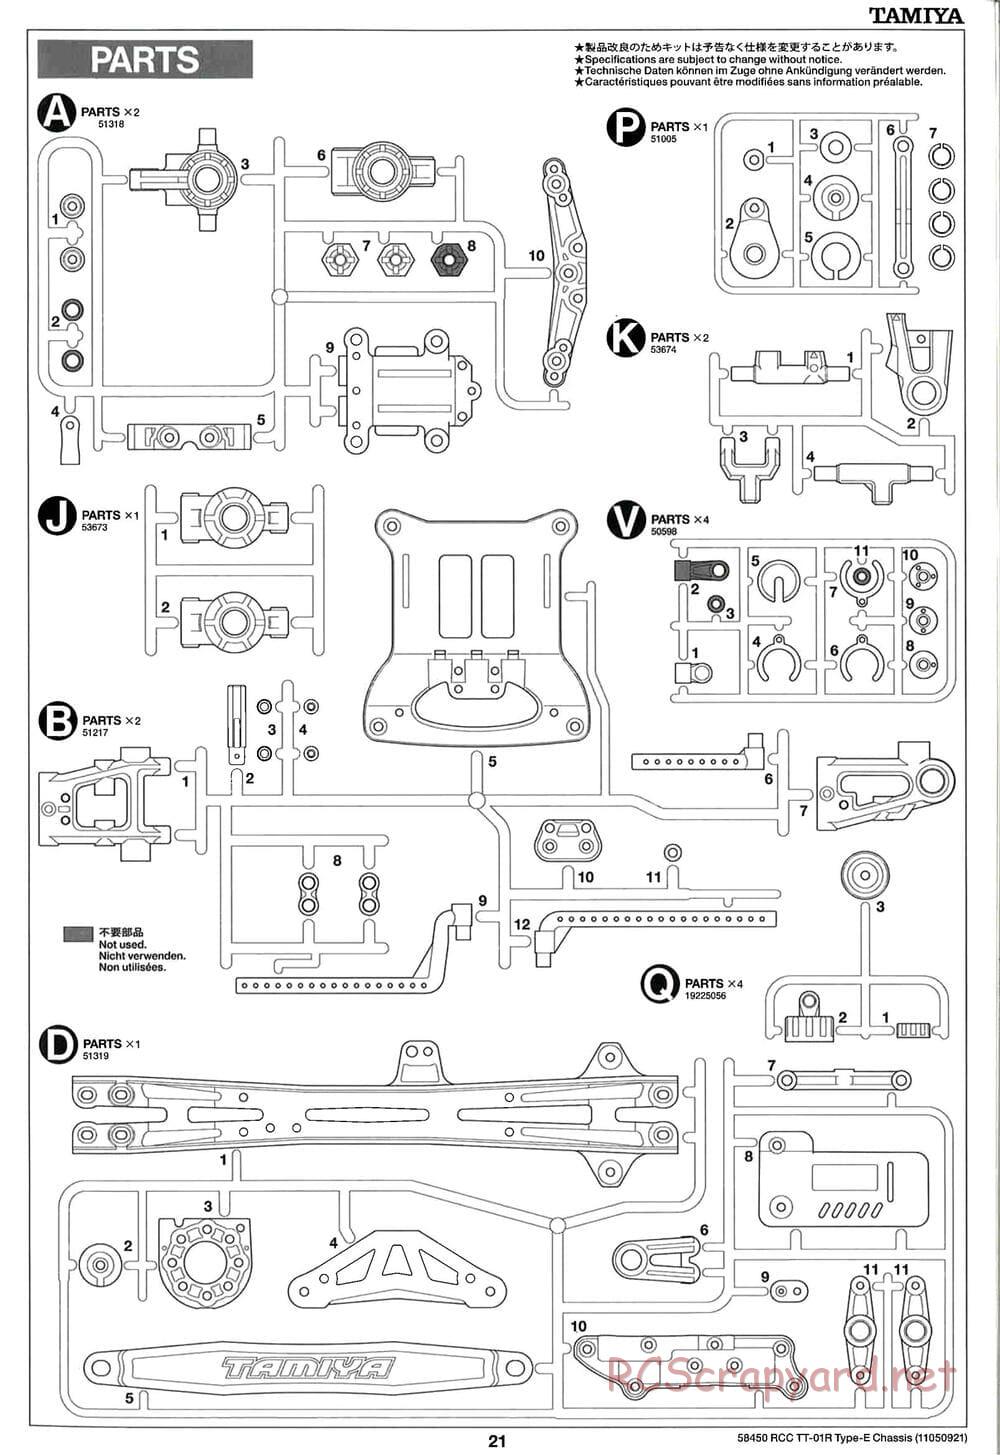 Tamiya - TT-01R Type-E Chassis - Manual - Page 21